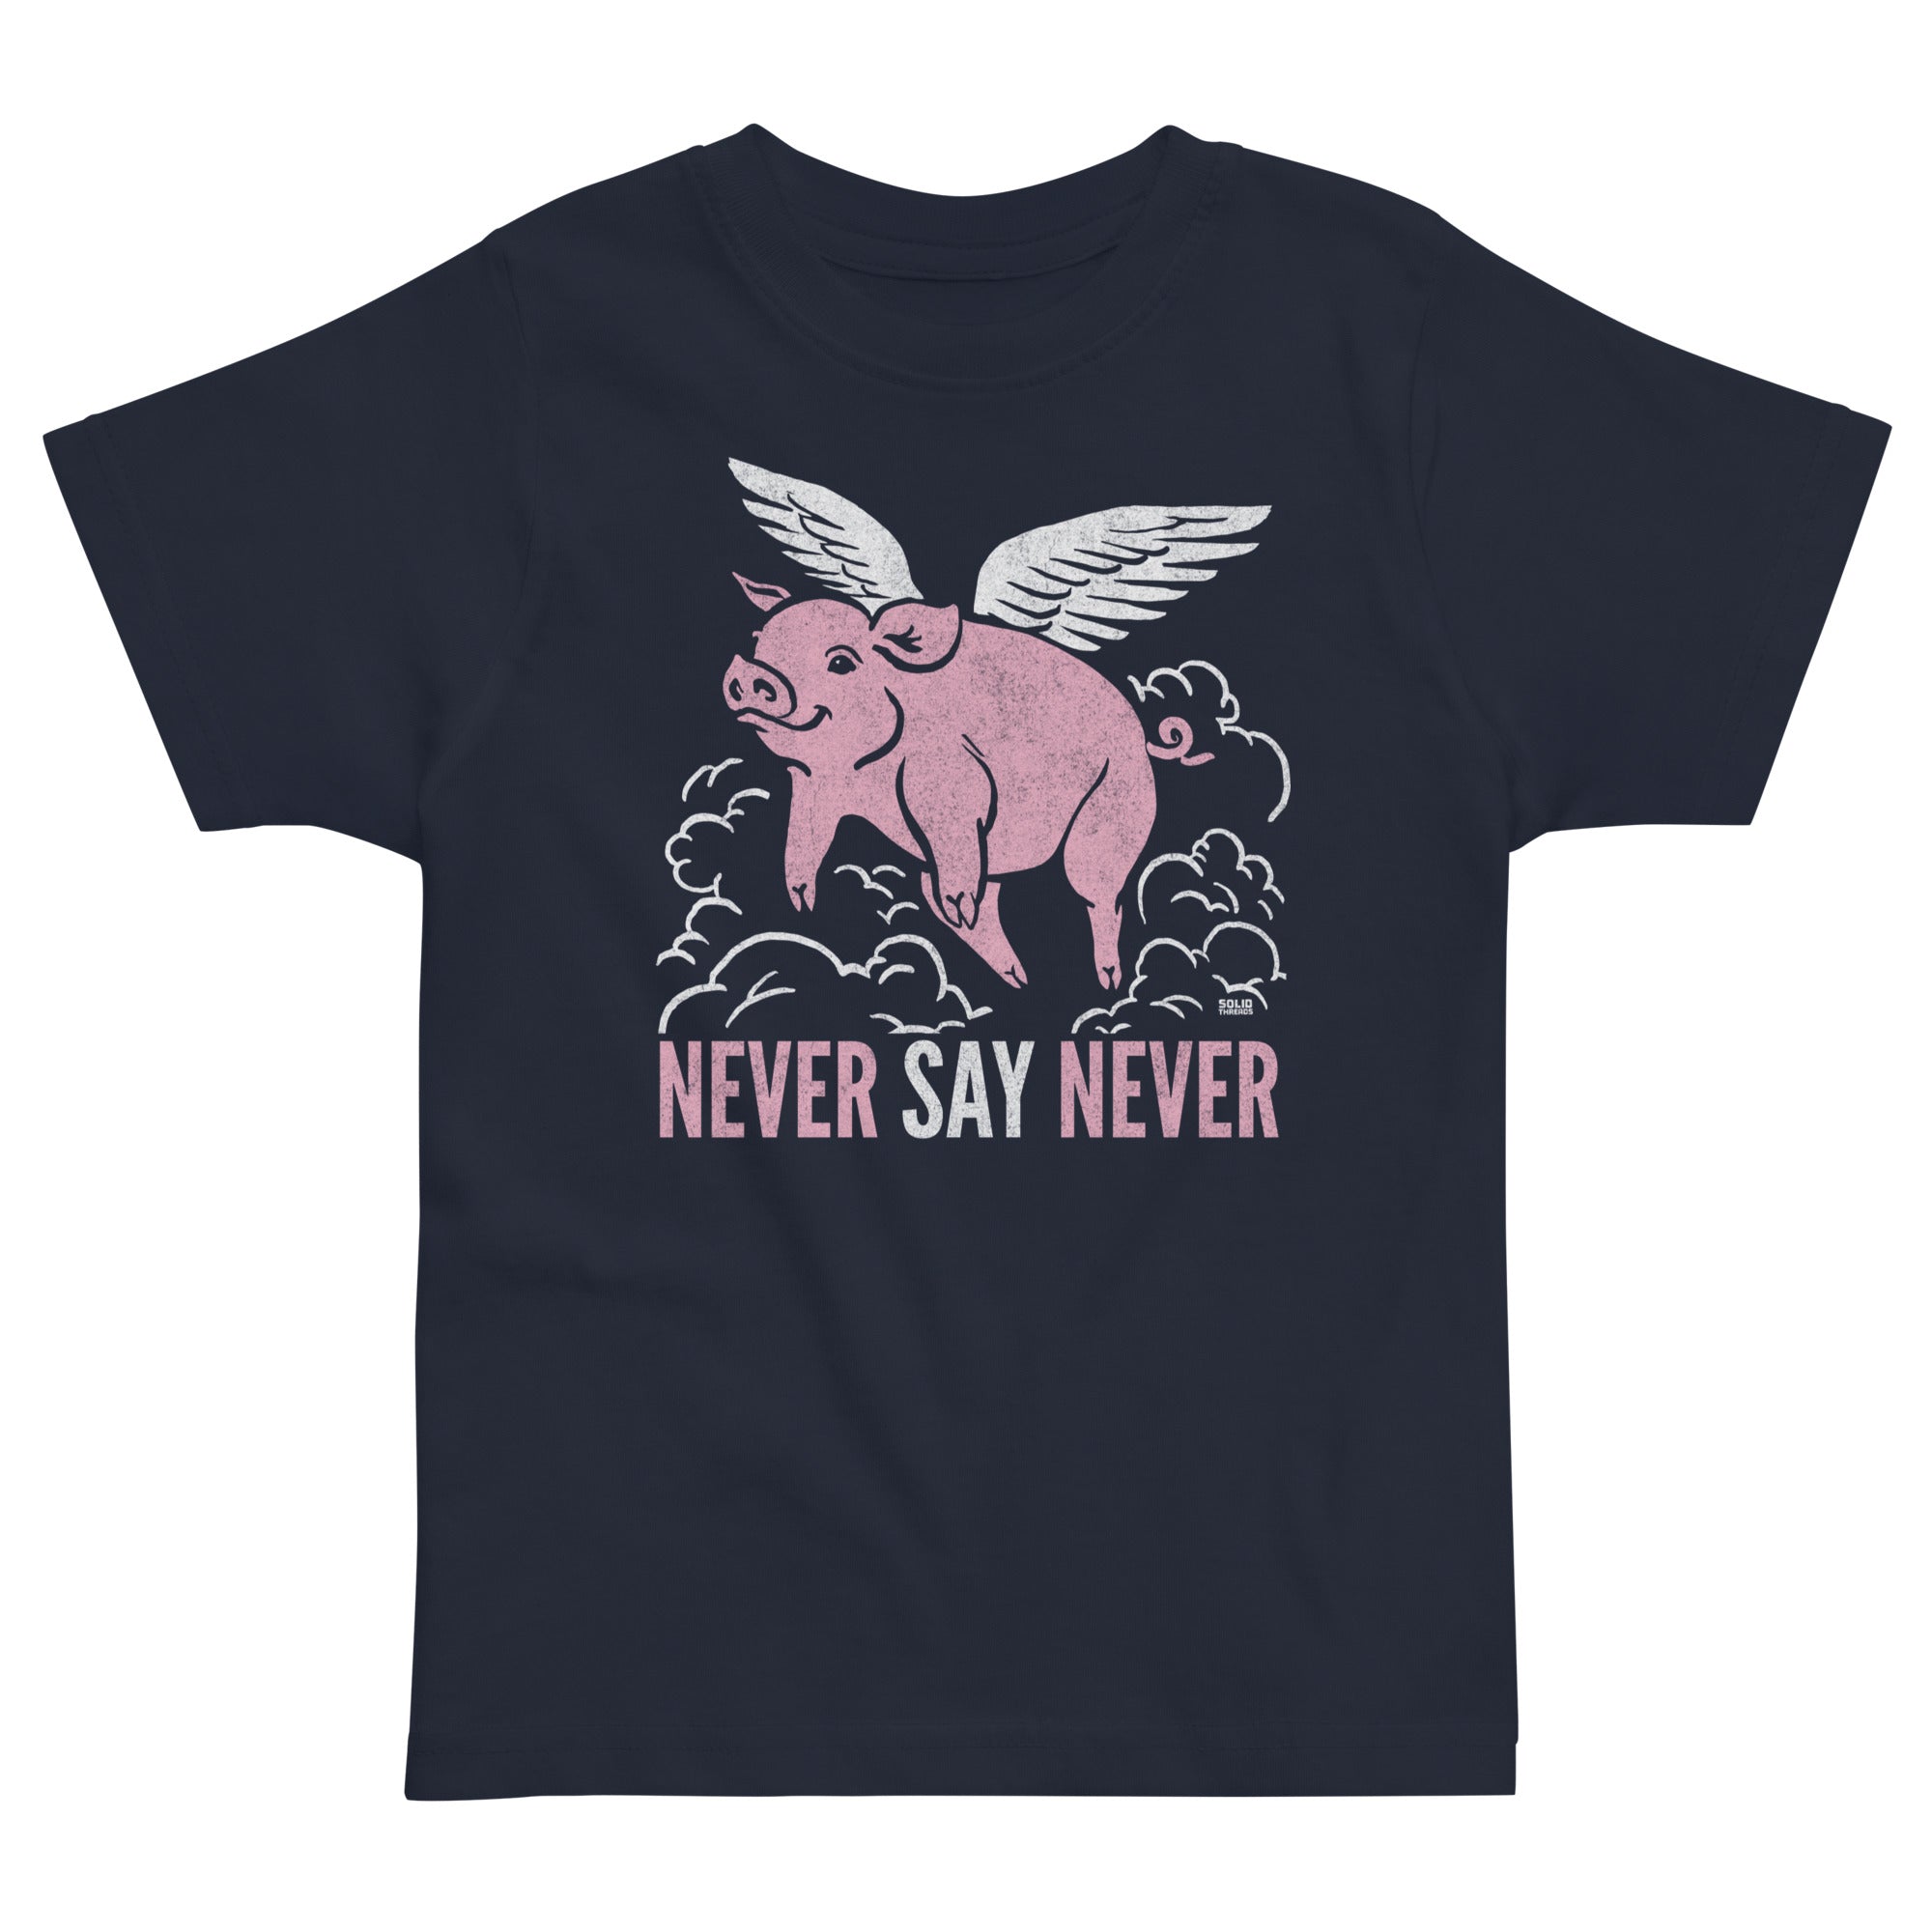 Toddler's Never Say Never Funny Extra Soft T-Shirt | Retro Optimism Tee  | Solid Threads